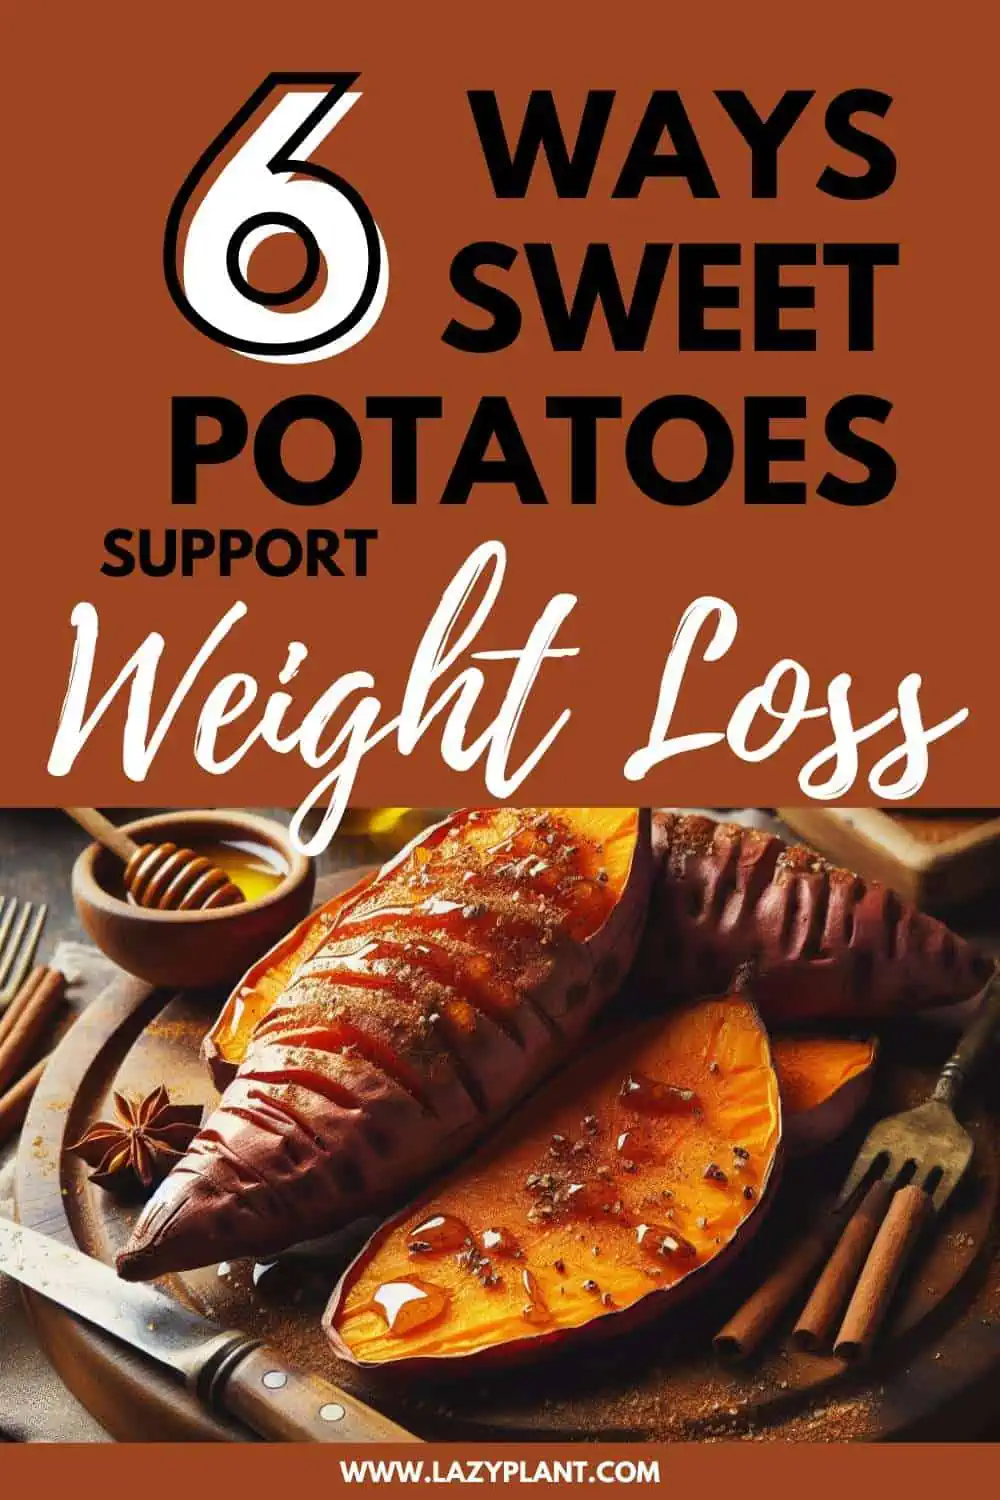 Why do sweet potatoes support Weight Loss?